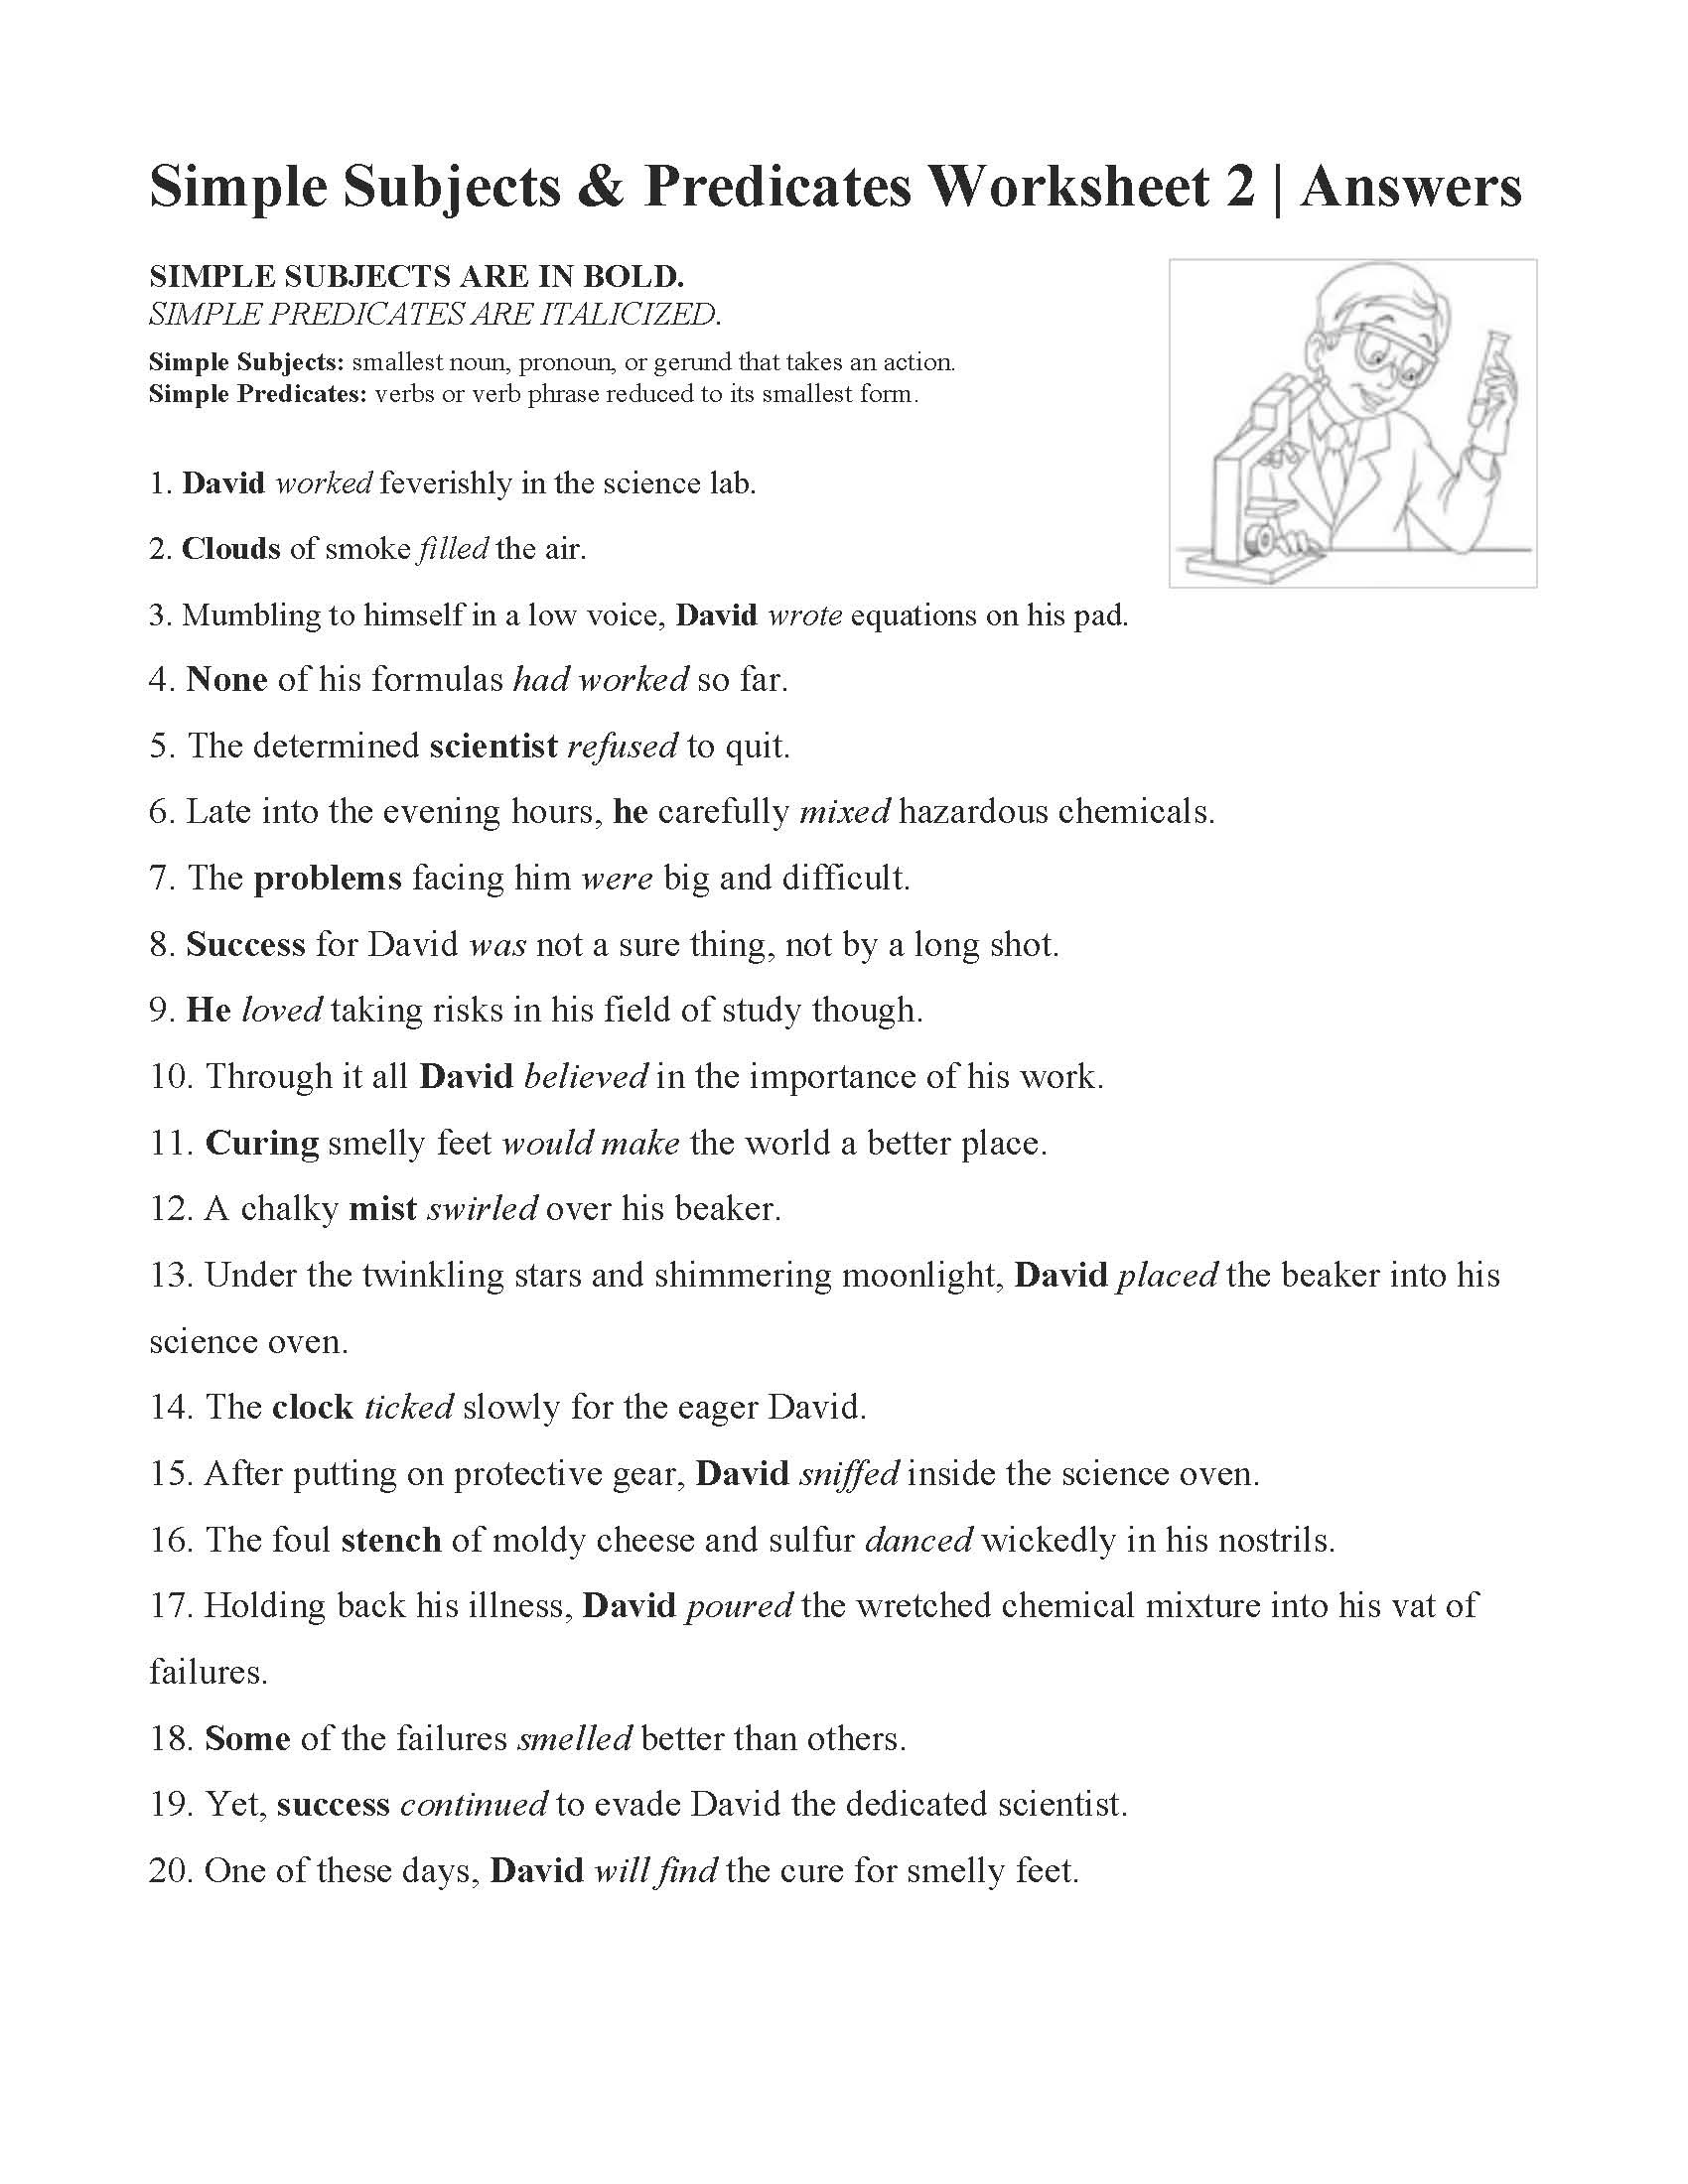 Subjects and Predicates Worksheet Simple Subjects and Predicates Worksheet 2